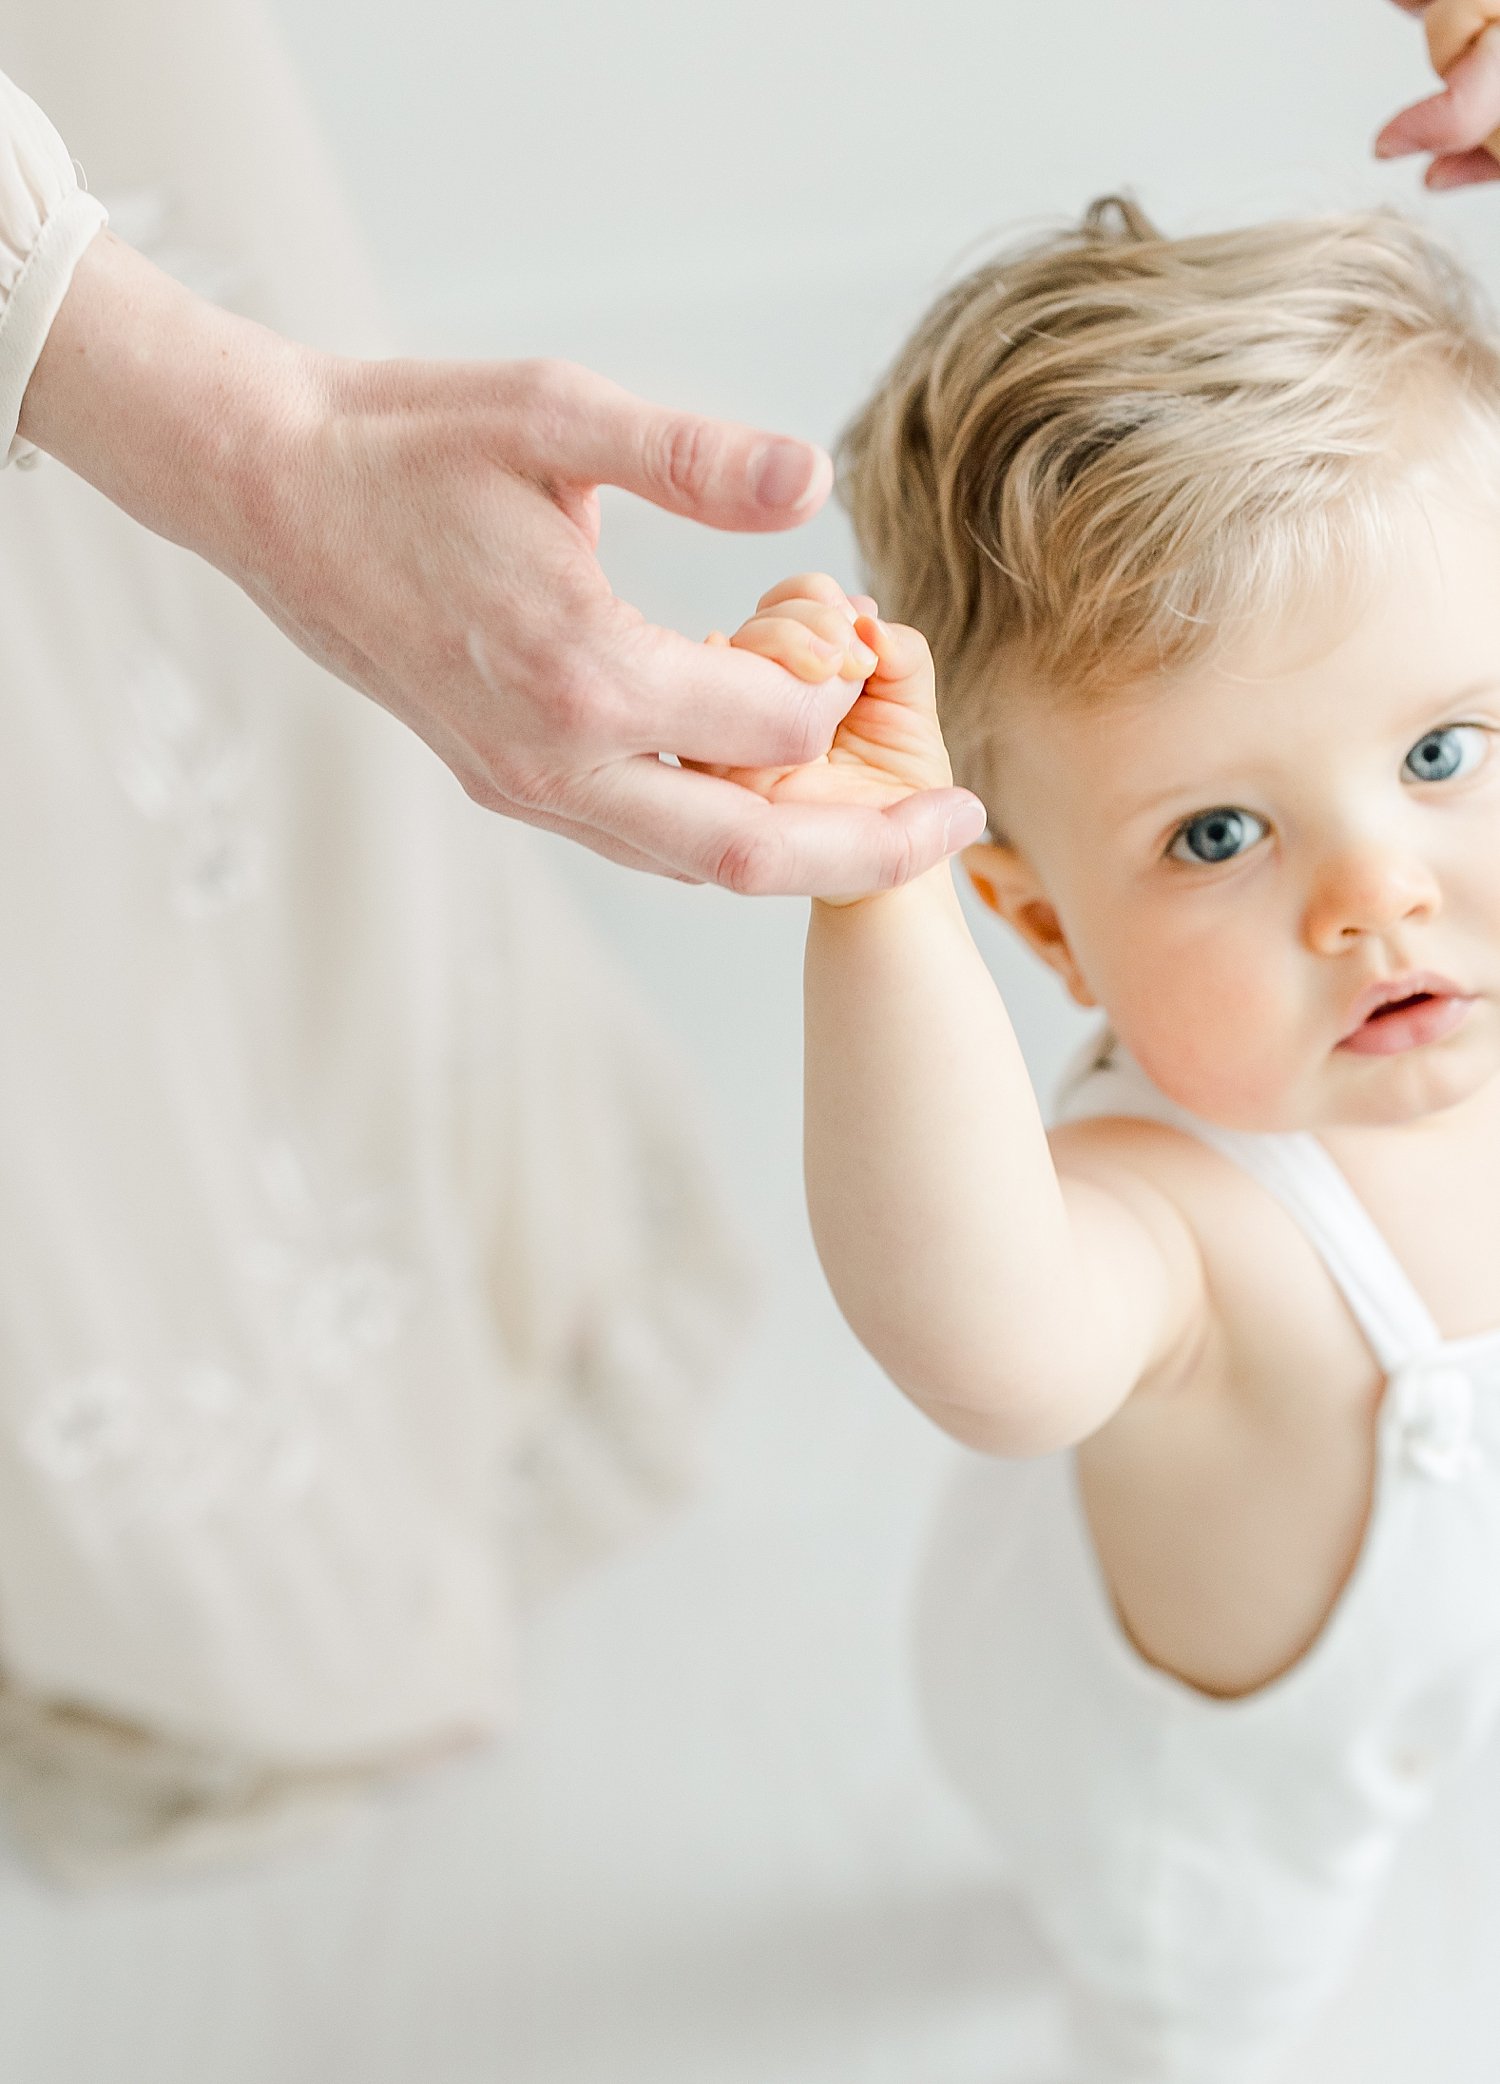 One year old holding Mom's hands looking up with big blue eyes | Kristin Wood Photography